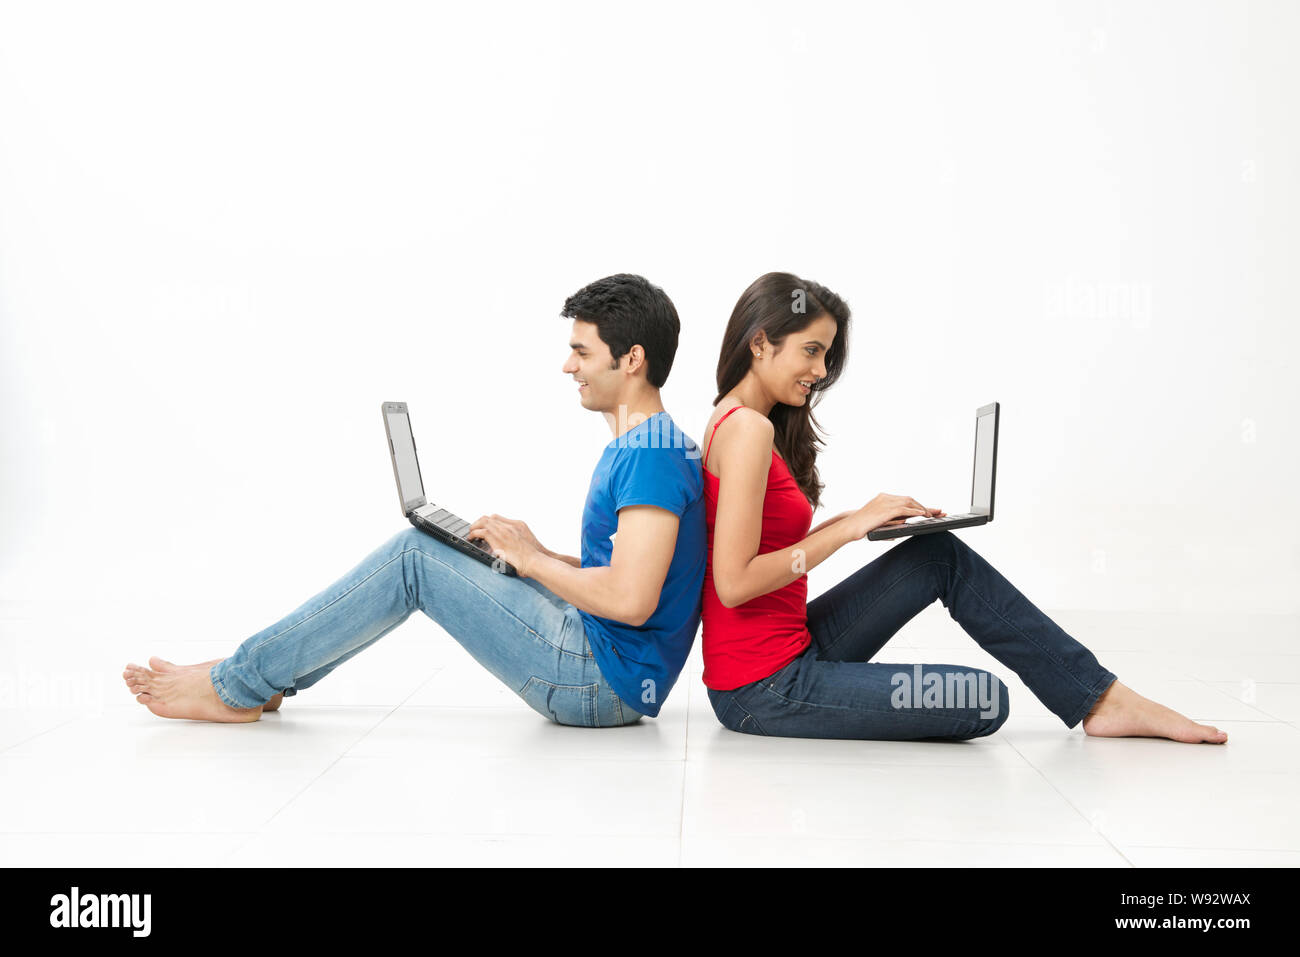 Young couple sitting on floor back to back and using laptops Stock Photo